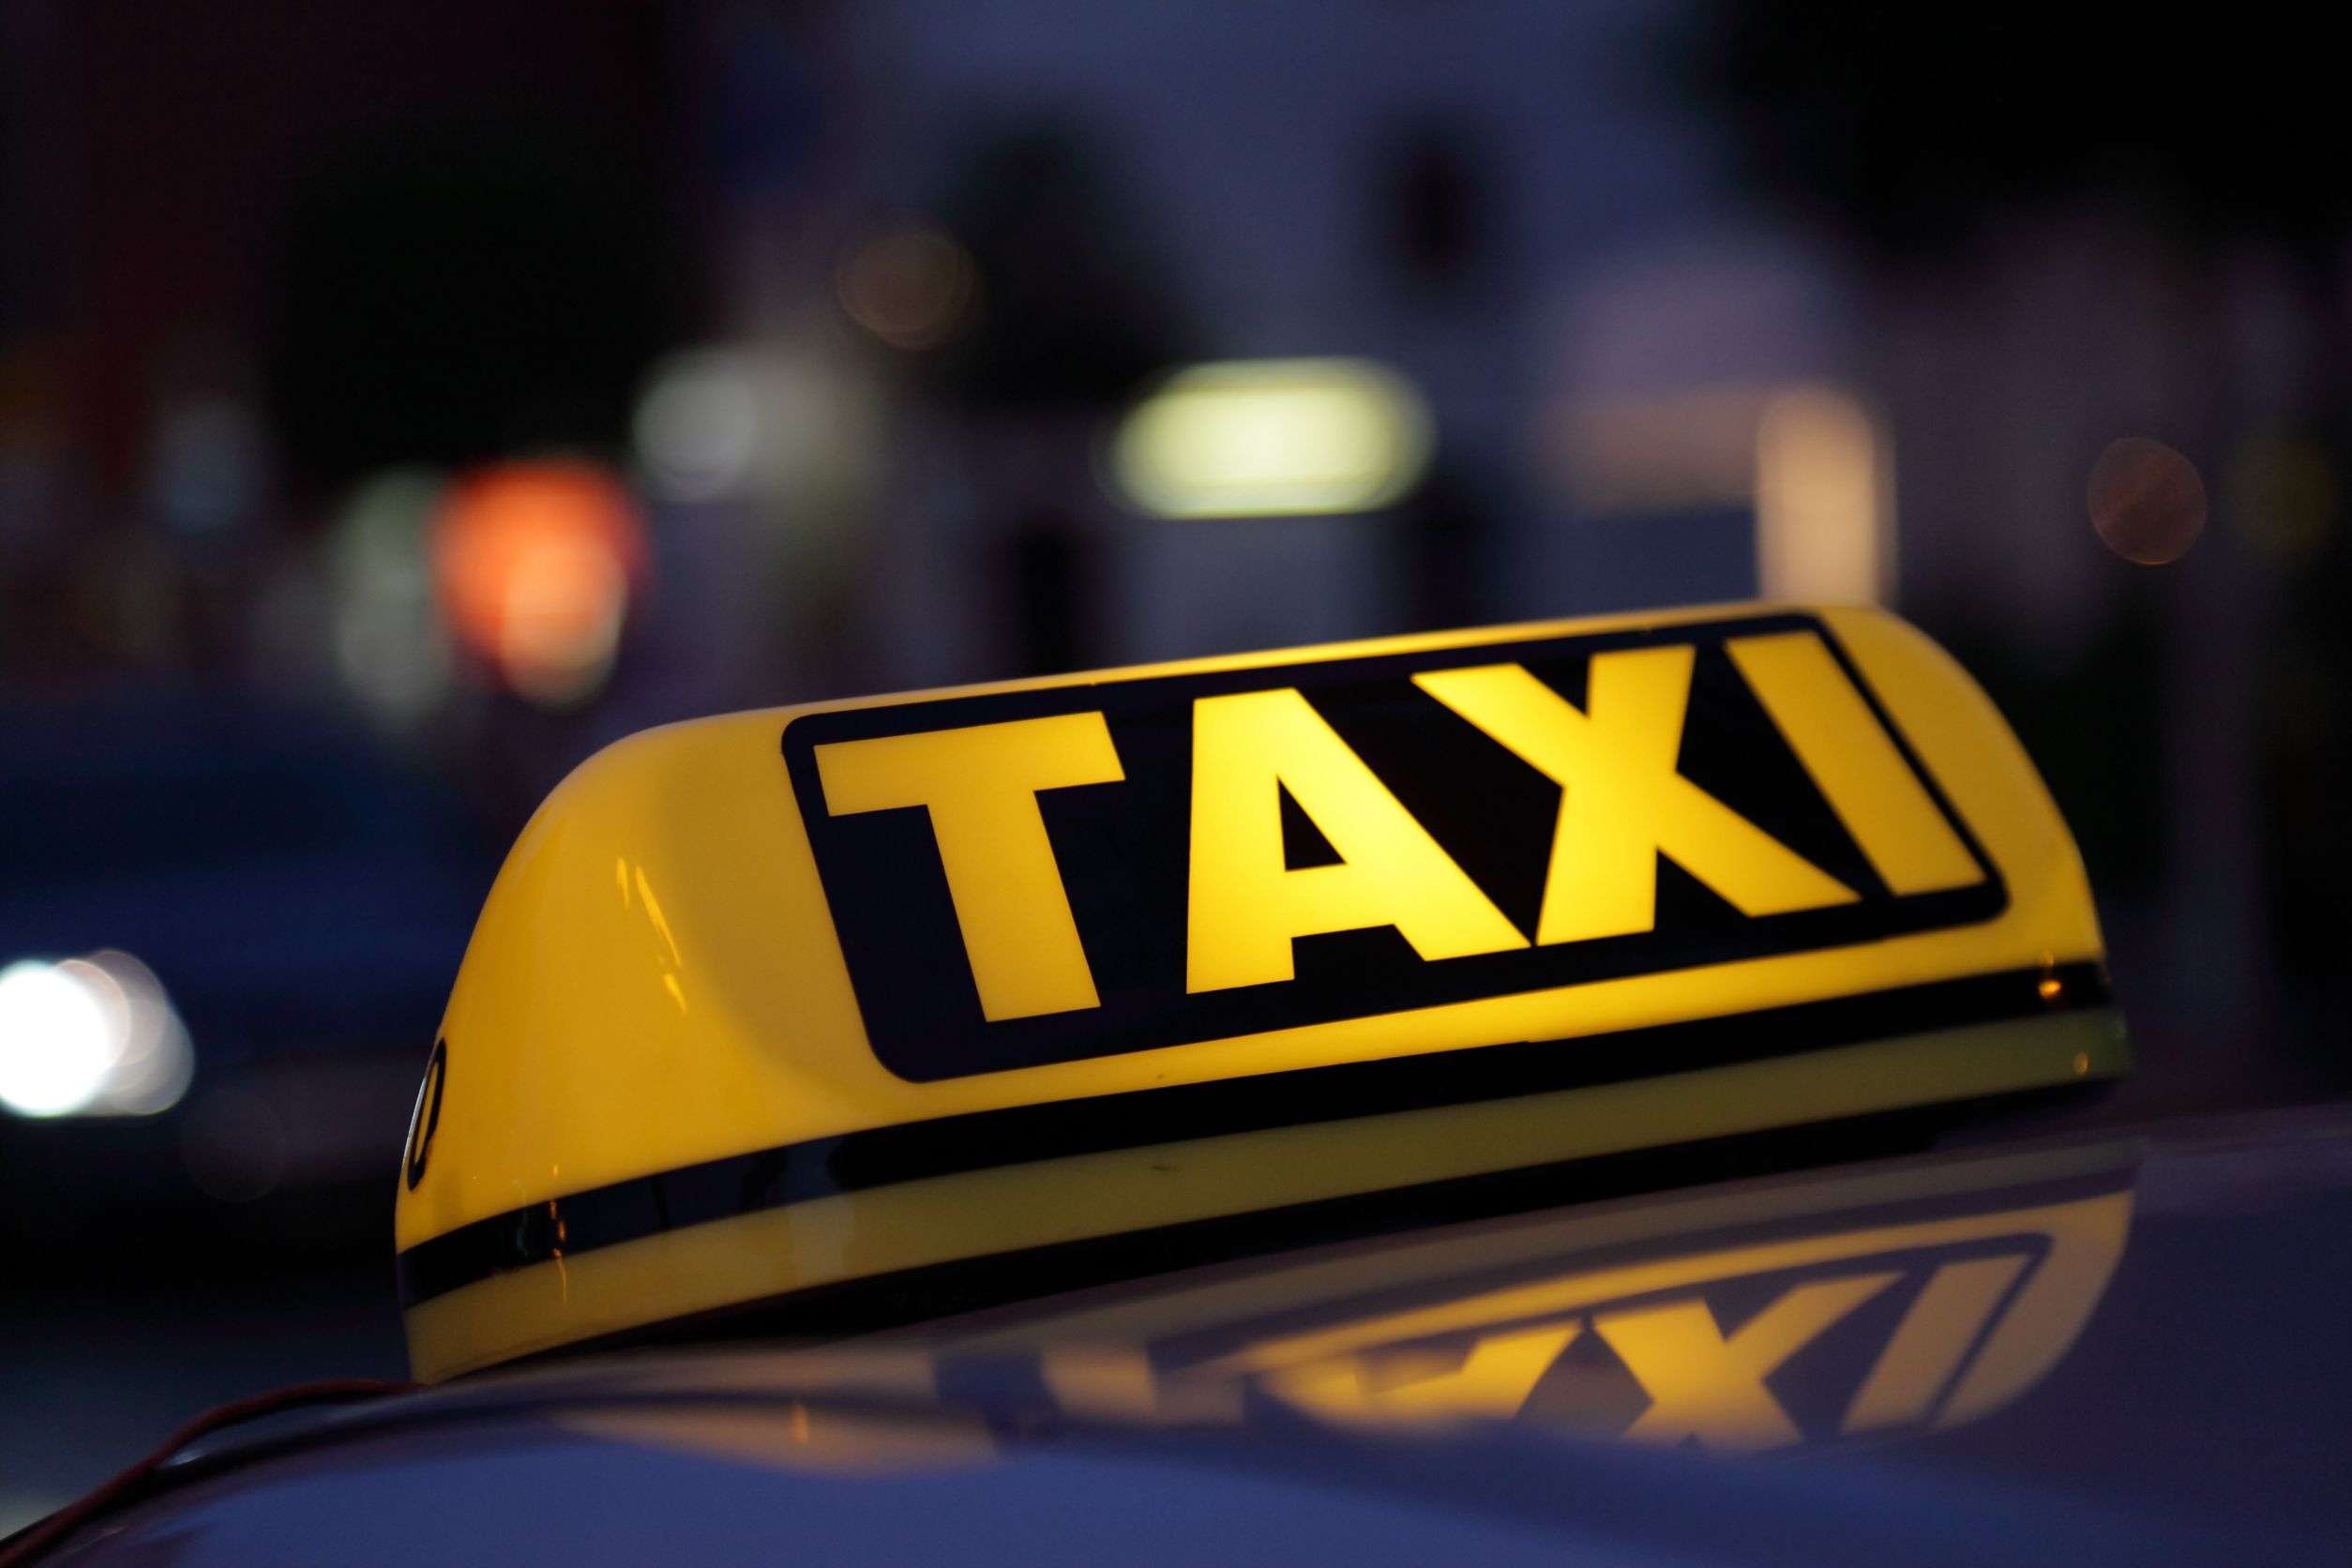 Taxi: Taxicab services, An individual, mostly door-to-door service. 2510x1680 HD Wallpaper.